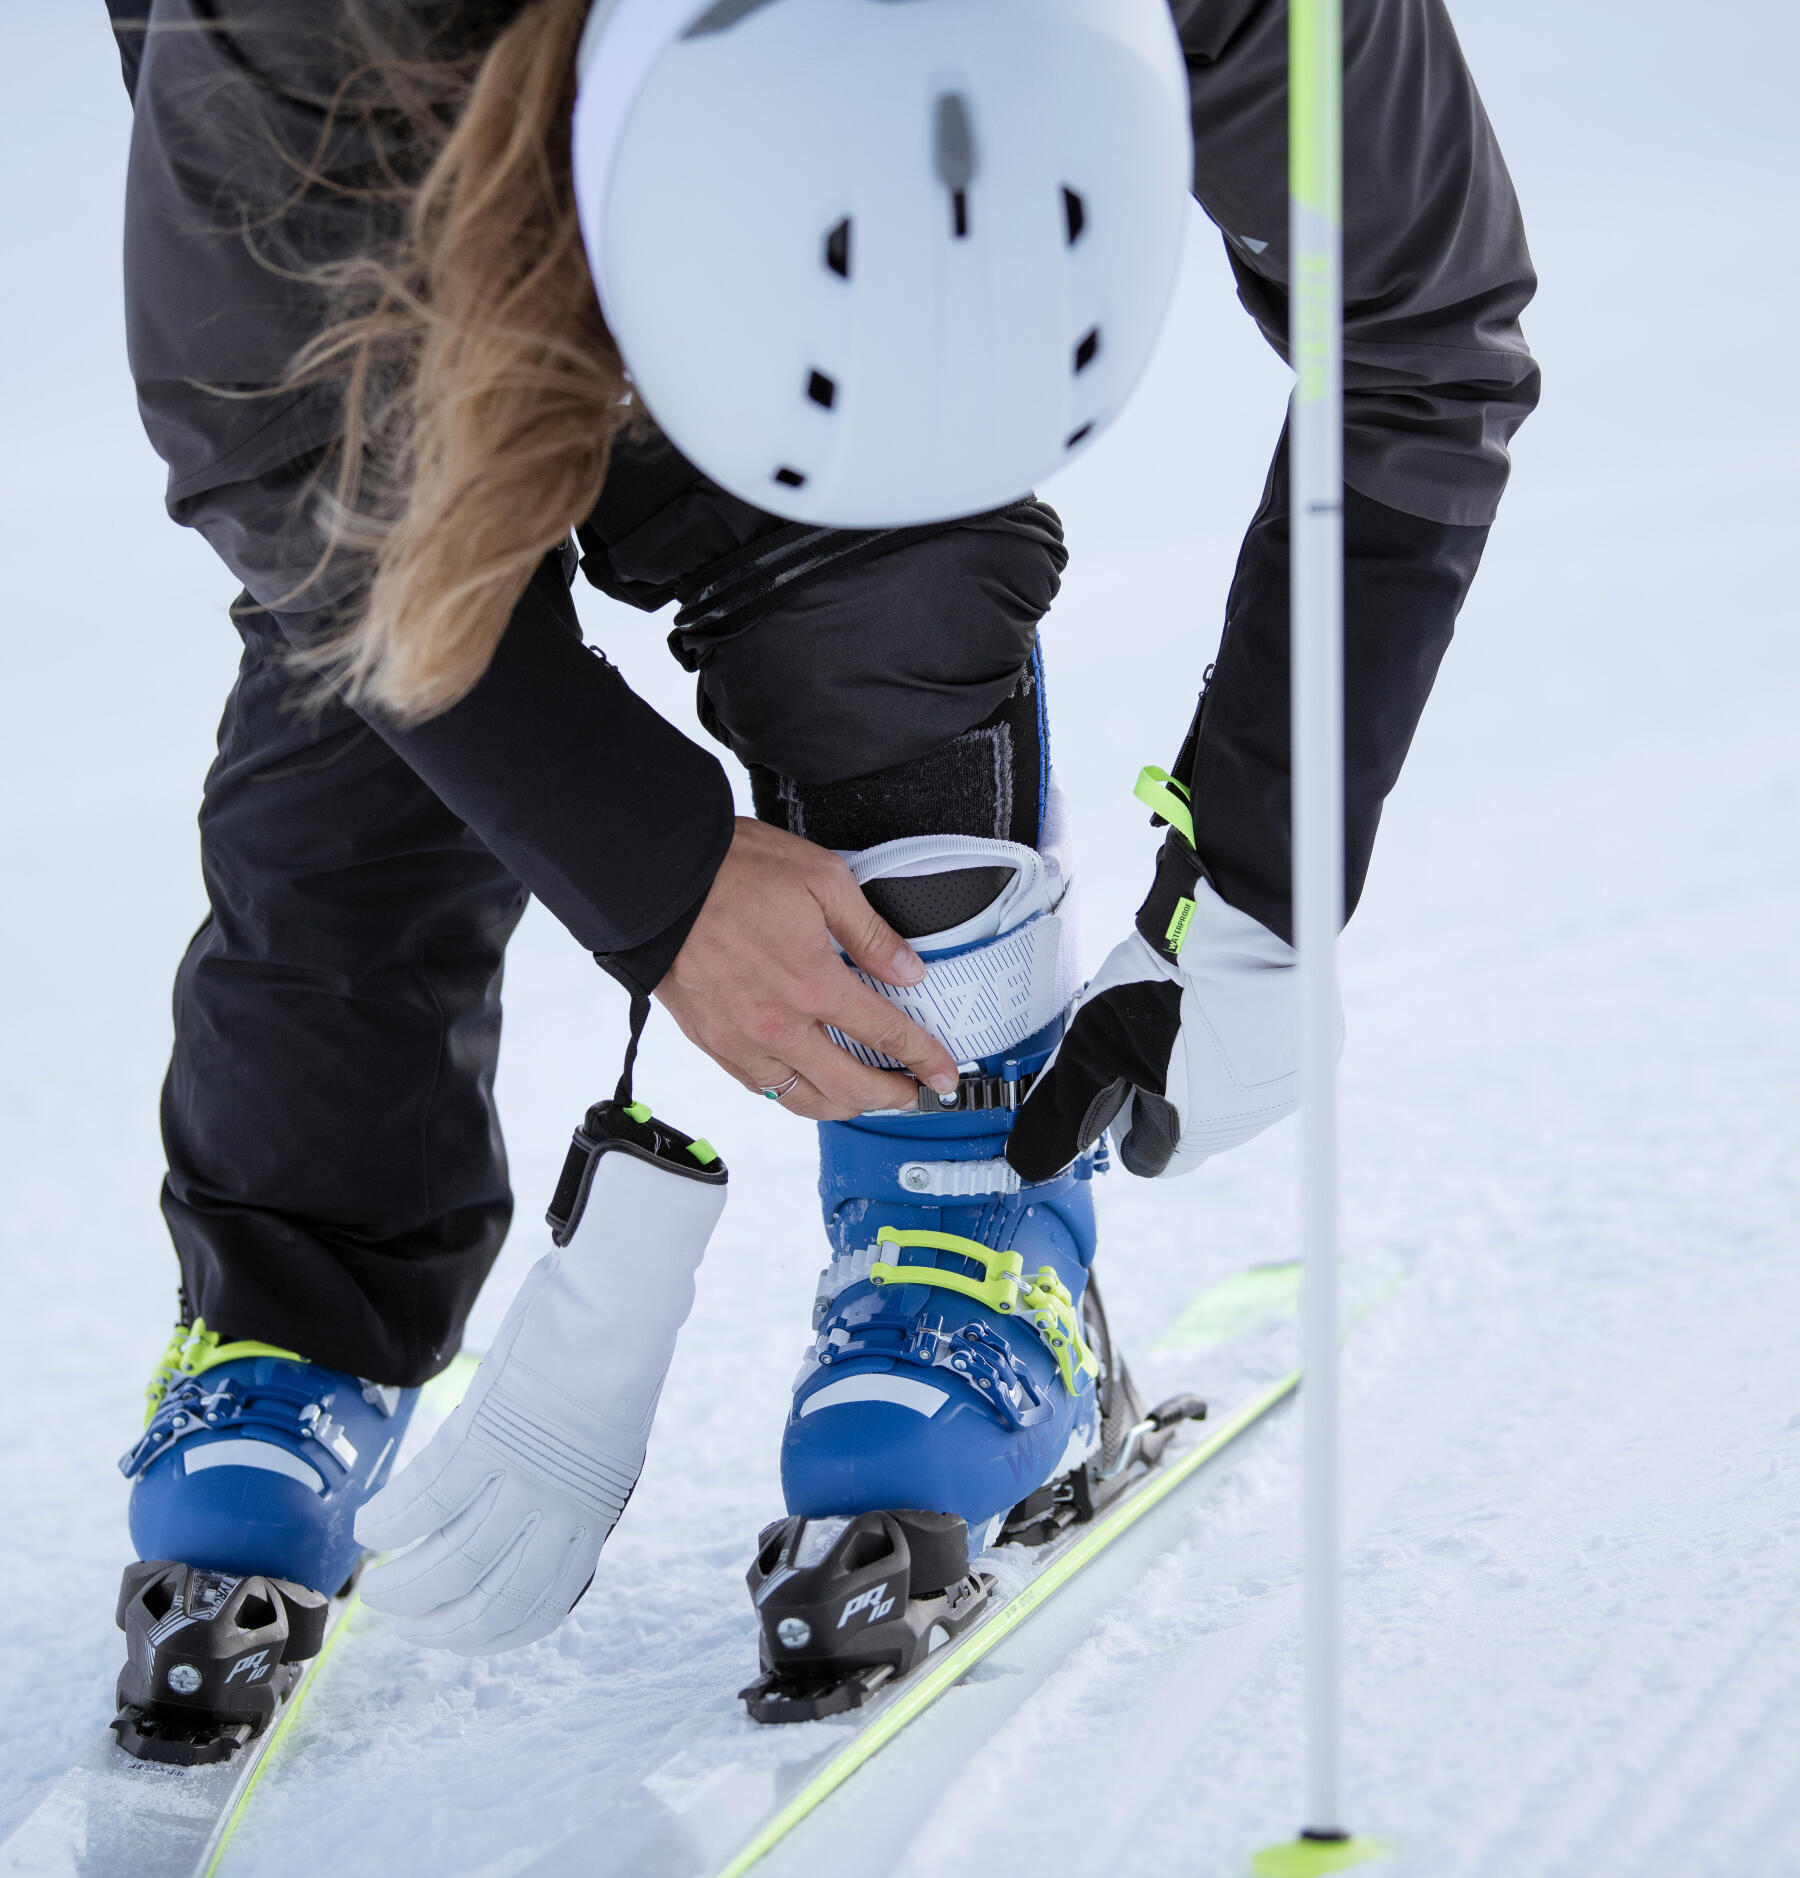 no more cold feet when wearing ski boots - media 3 